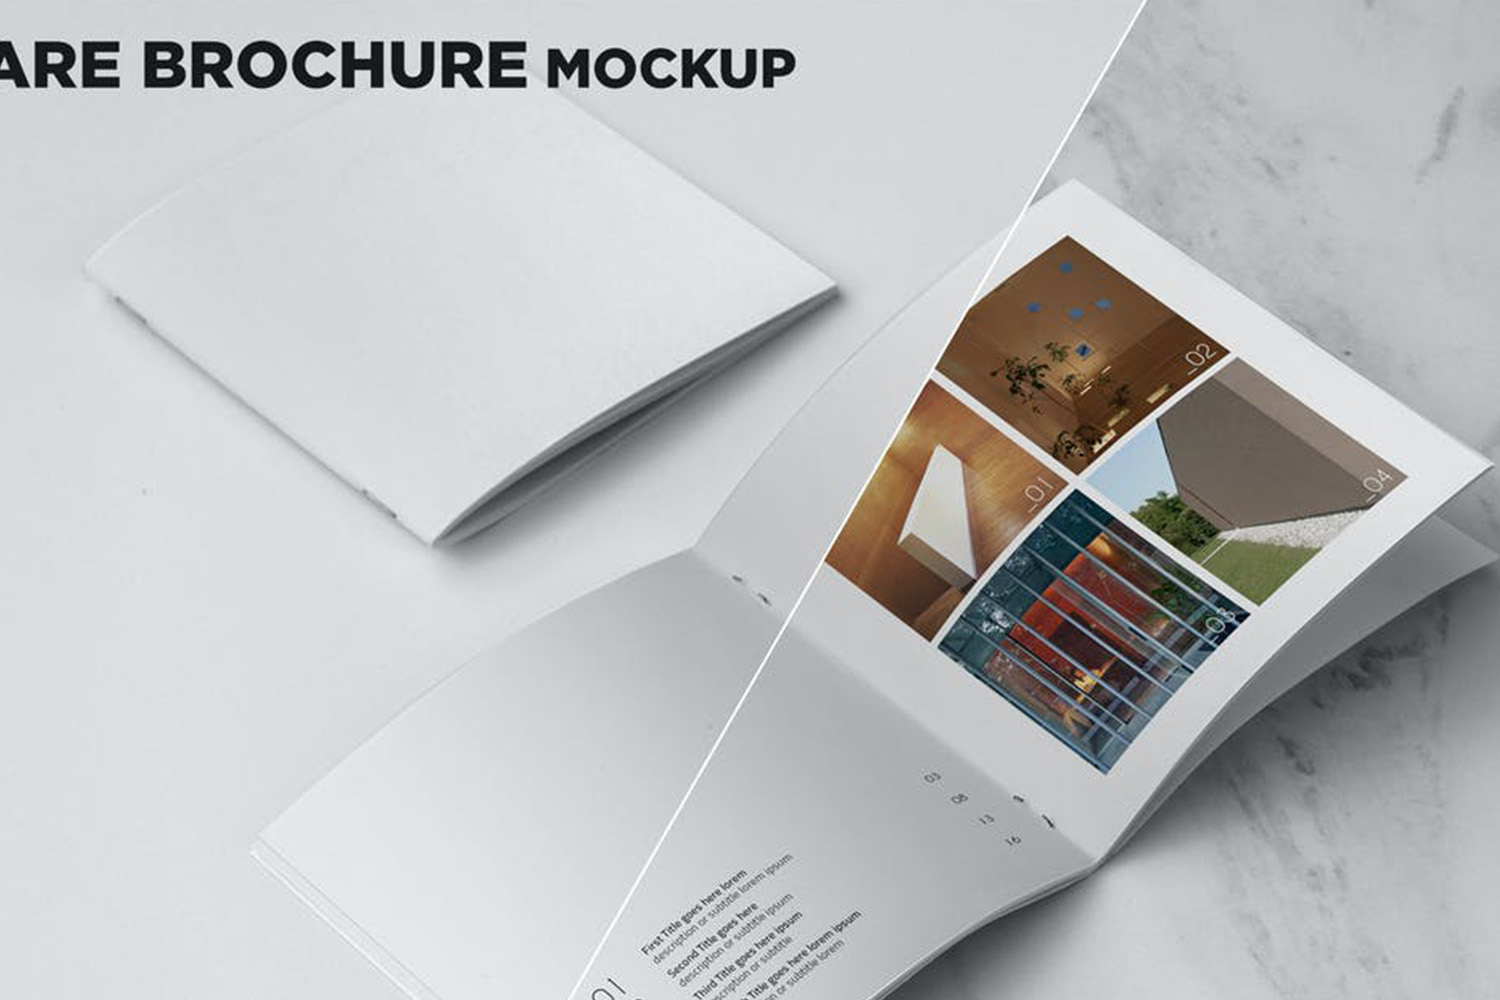 Square Brochure Cover & Open Pages Mockup Free Download